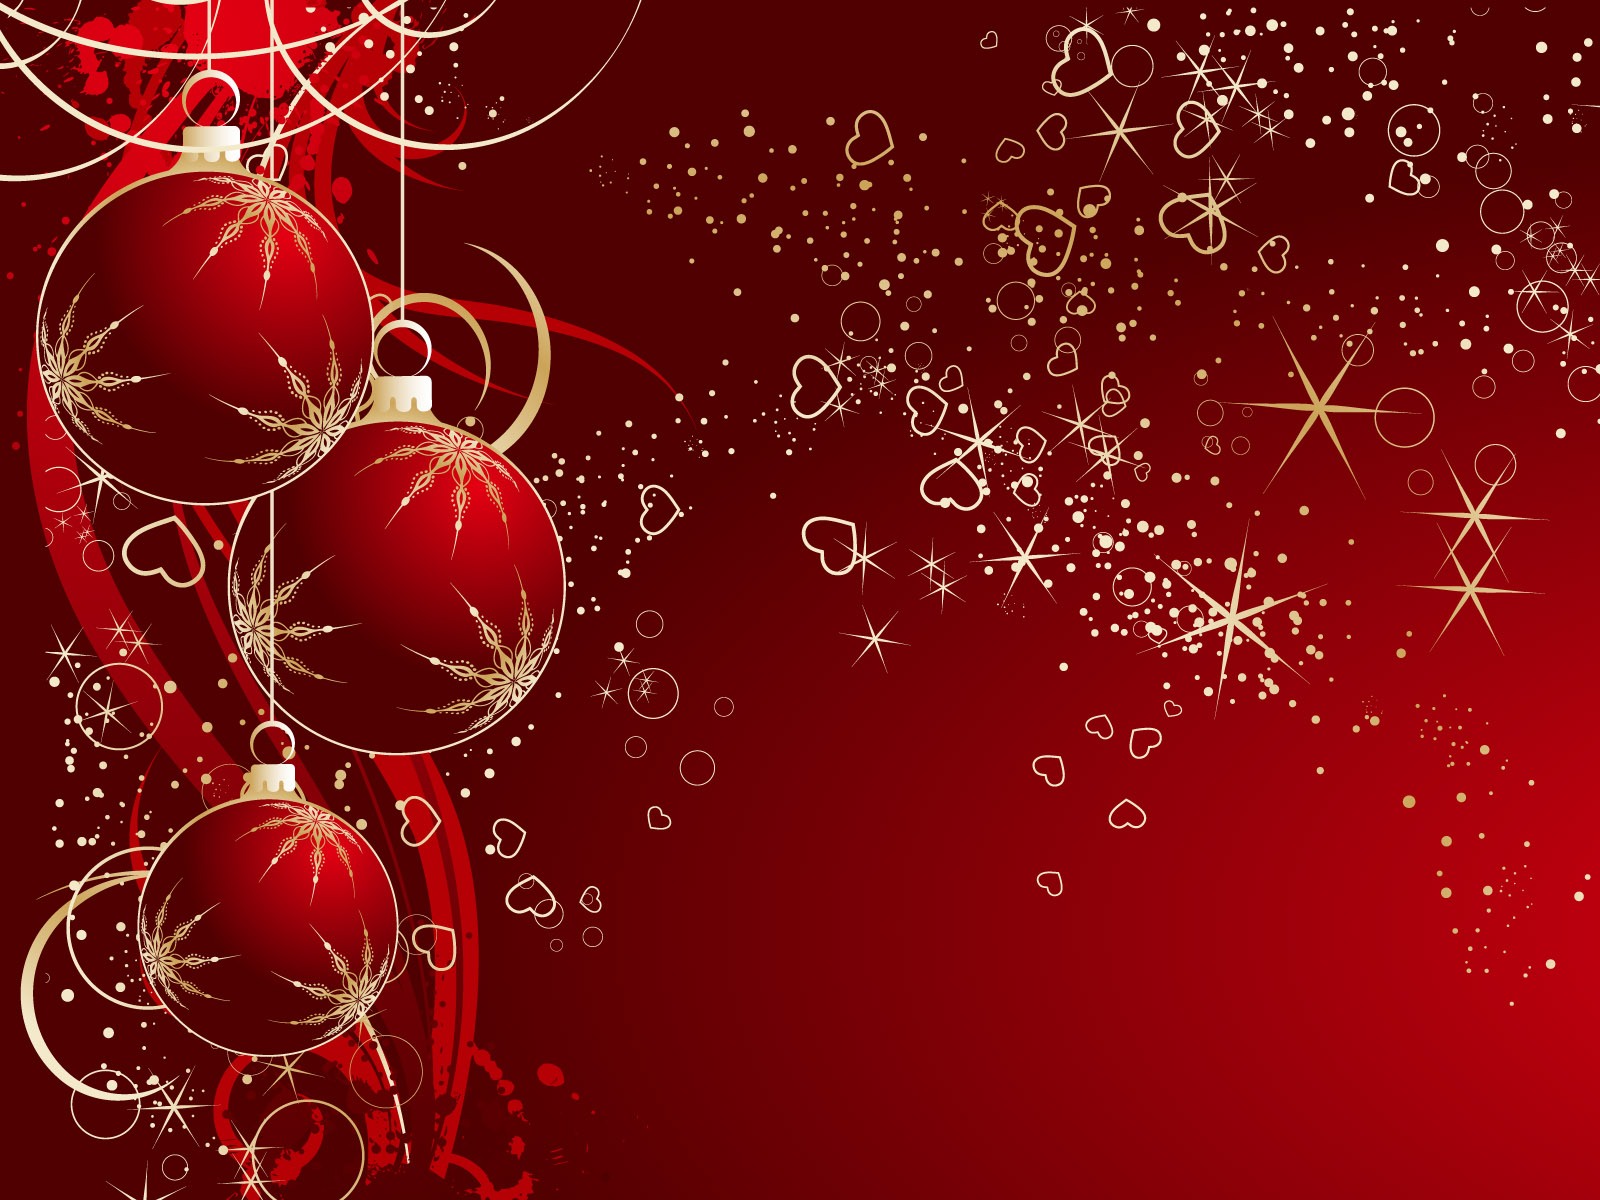 Christmas Background Free Red Christmas Backgrounds Red Christmas